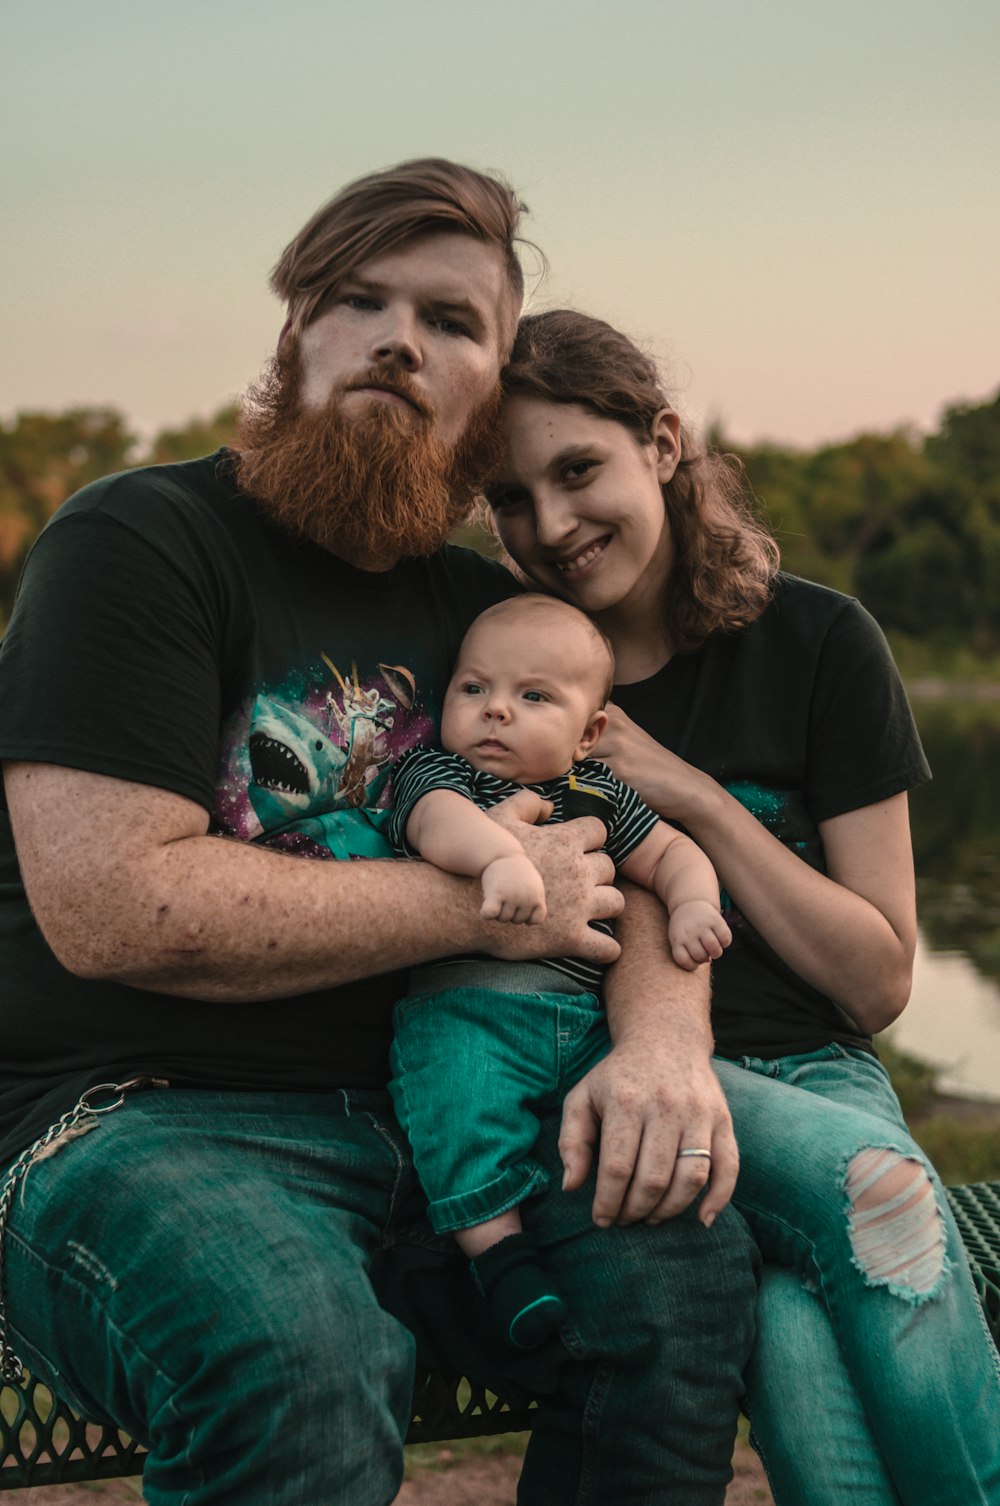 man, woman, and baby sitting on bench outdoors